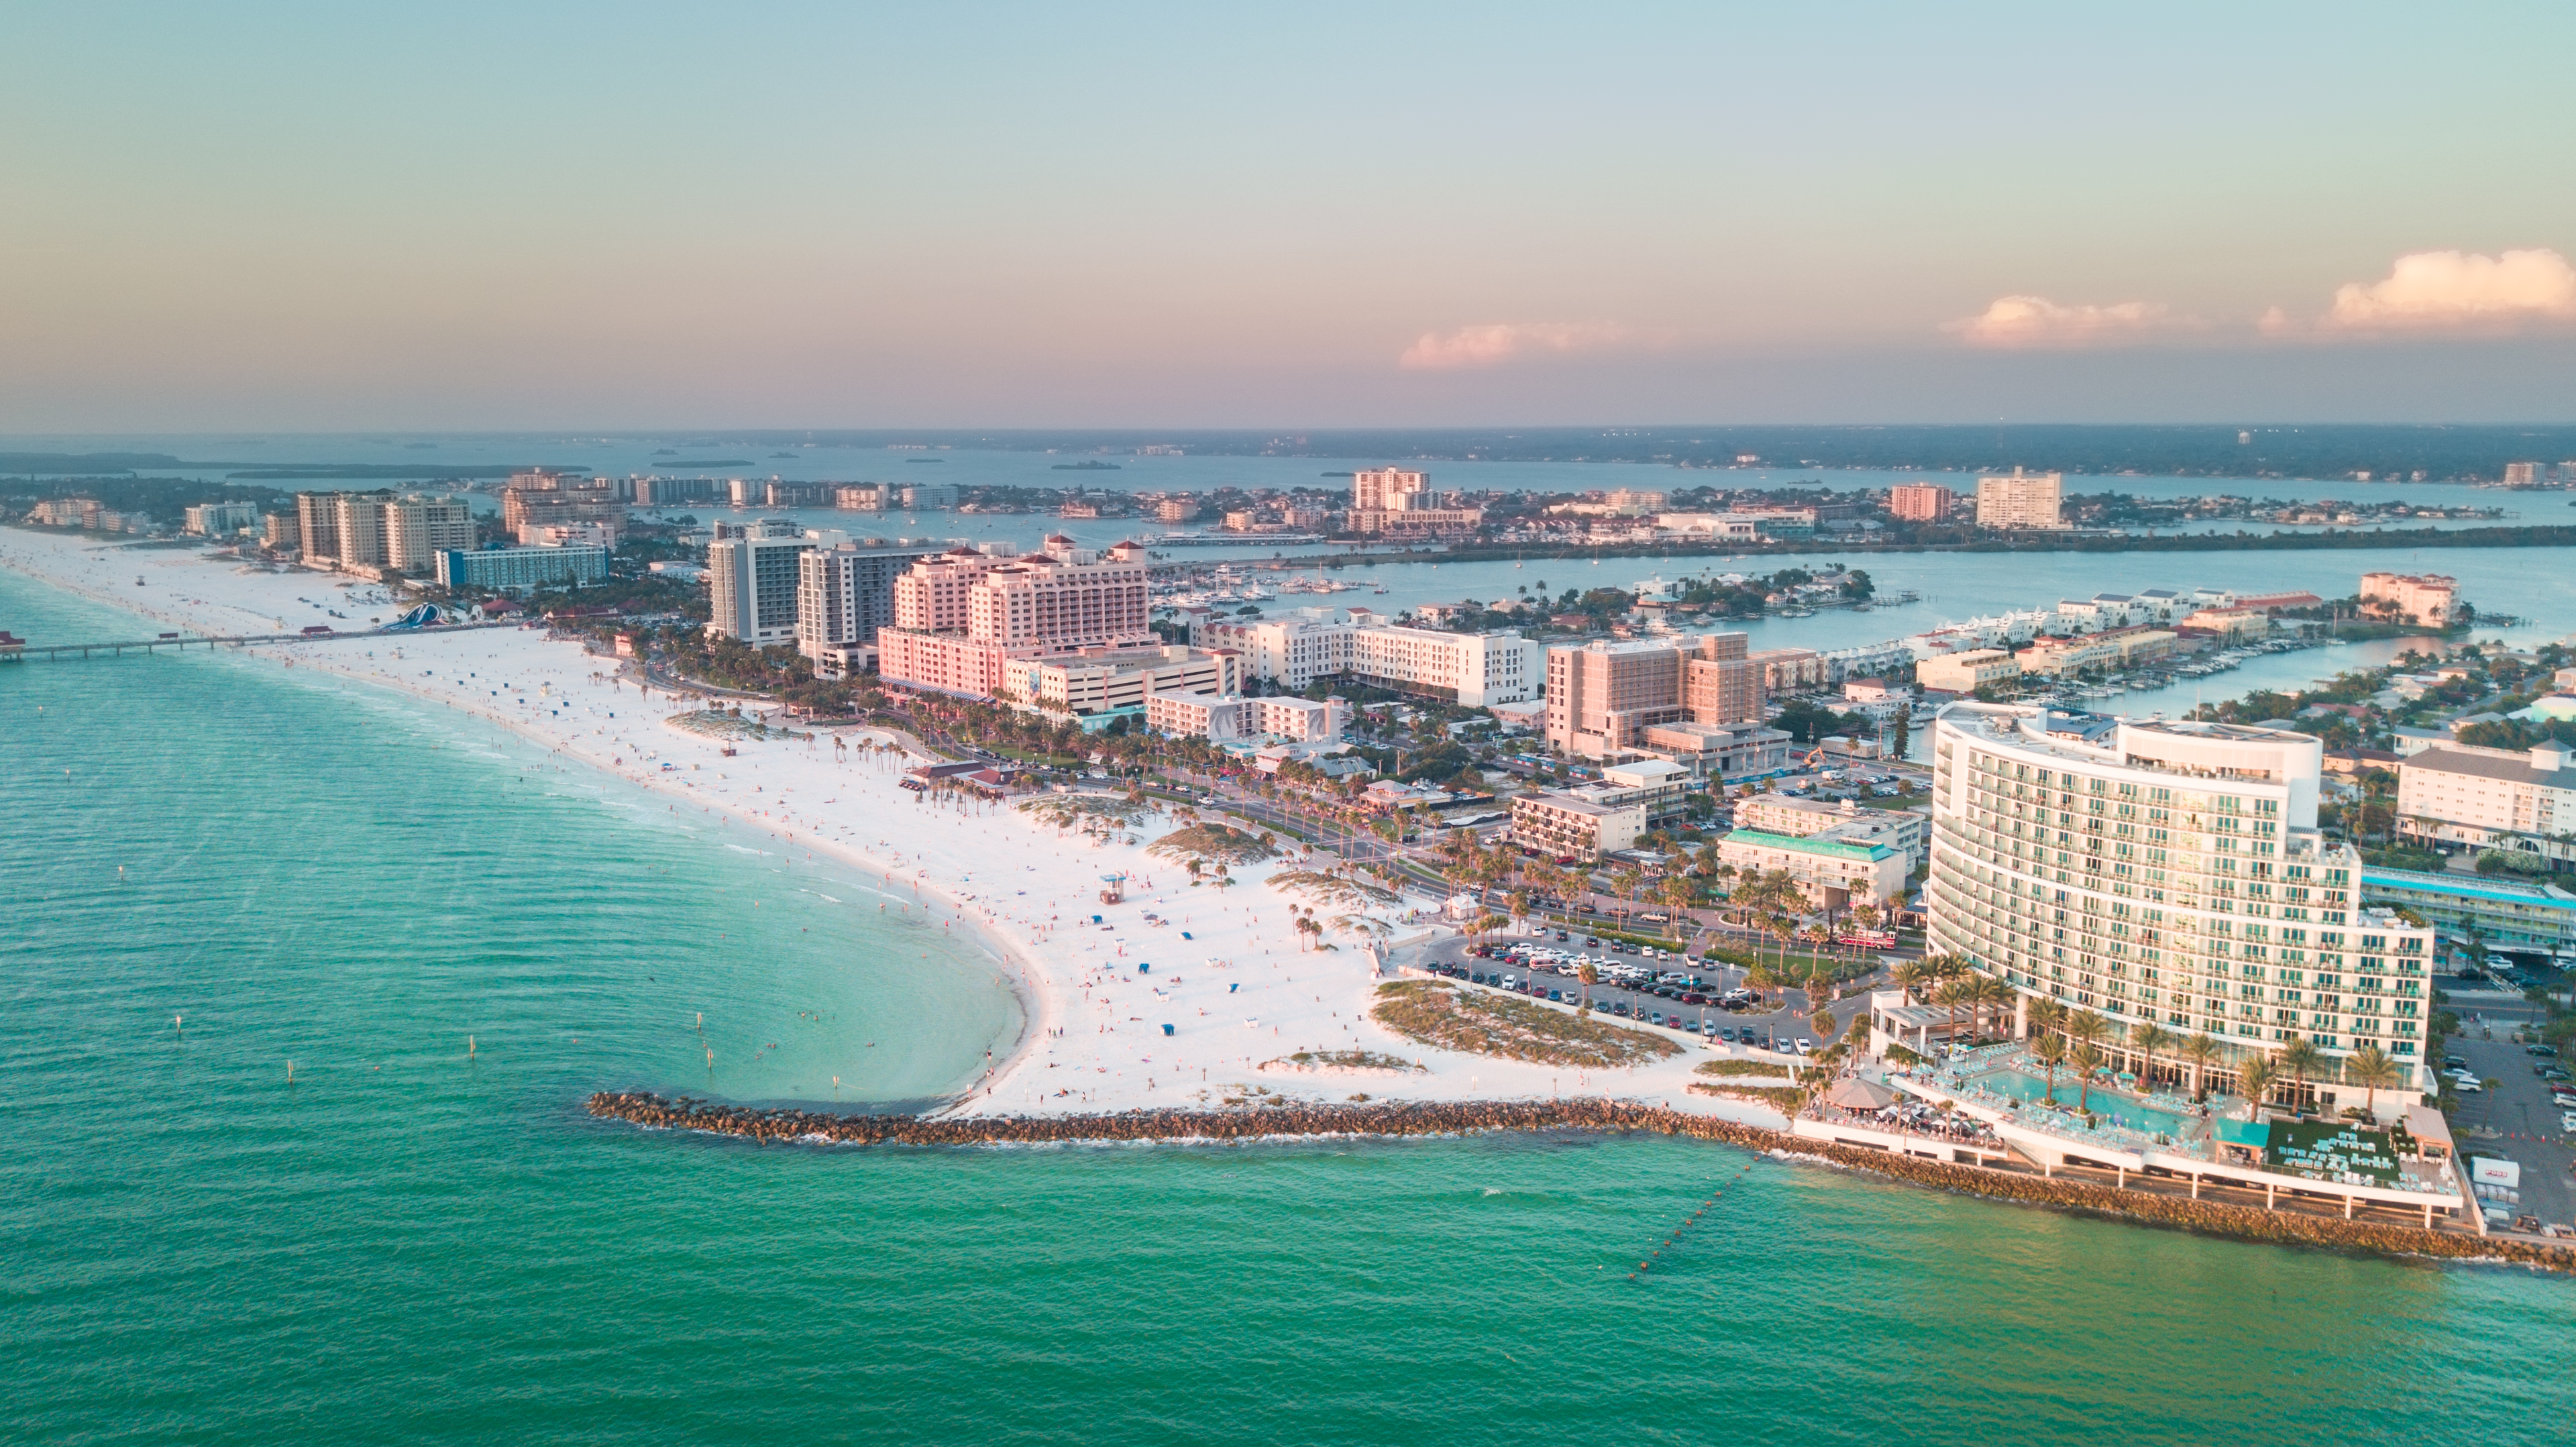 Aerial view of Clearwater Beach coastline with beach hotels, blue water and a morning sky  